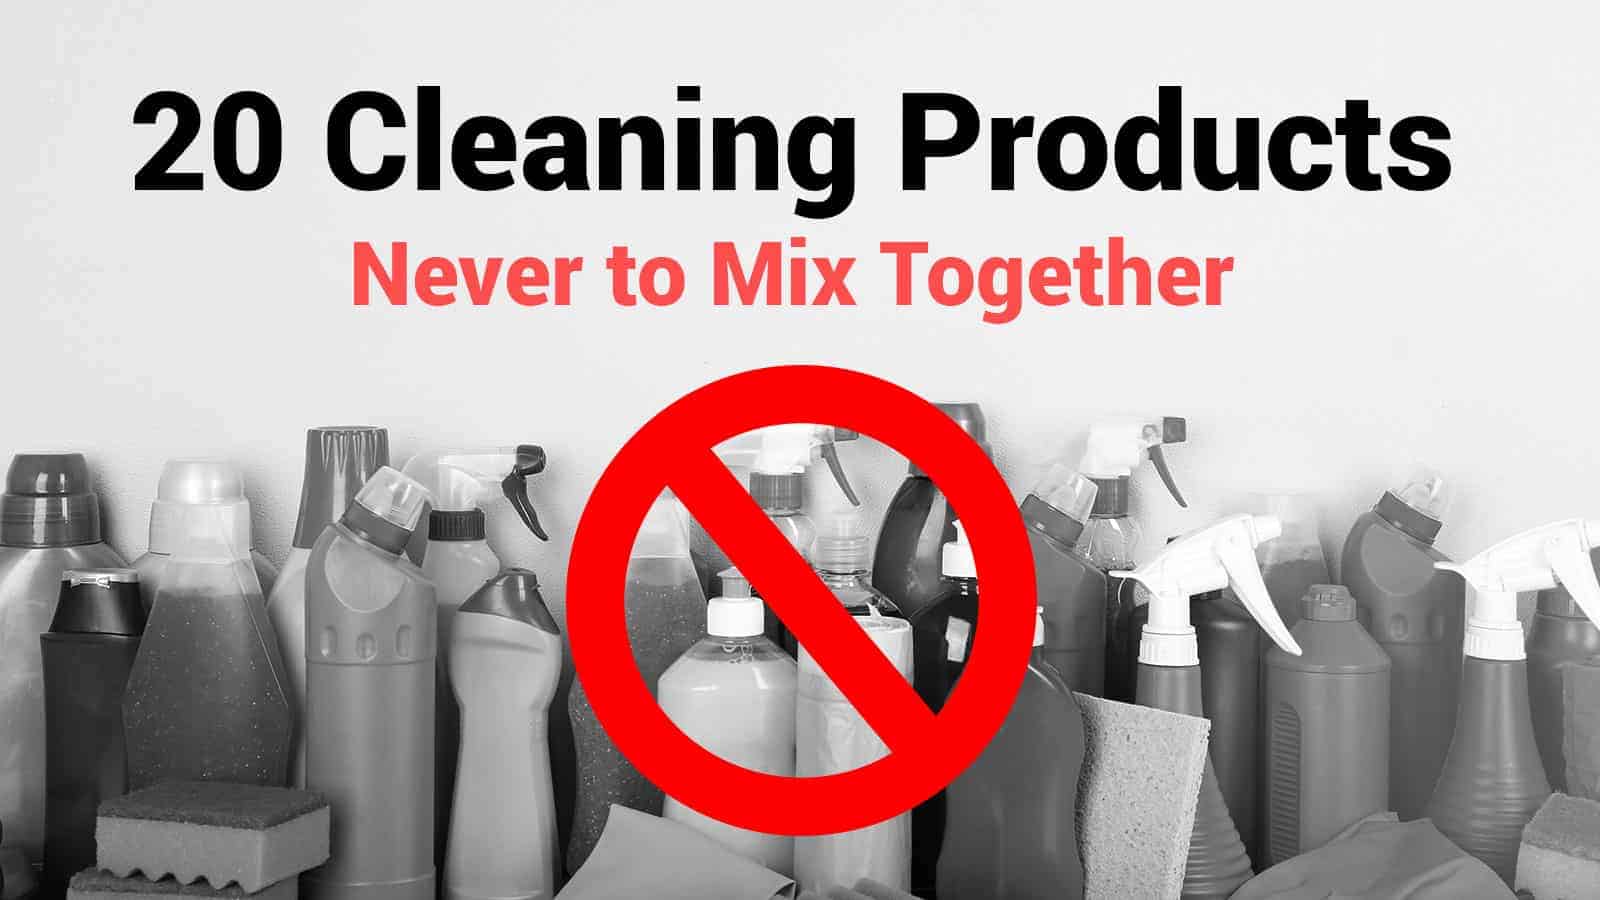 20 Cleaning Products Never to Mix Together